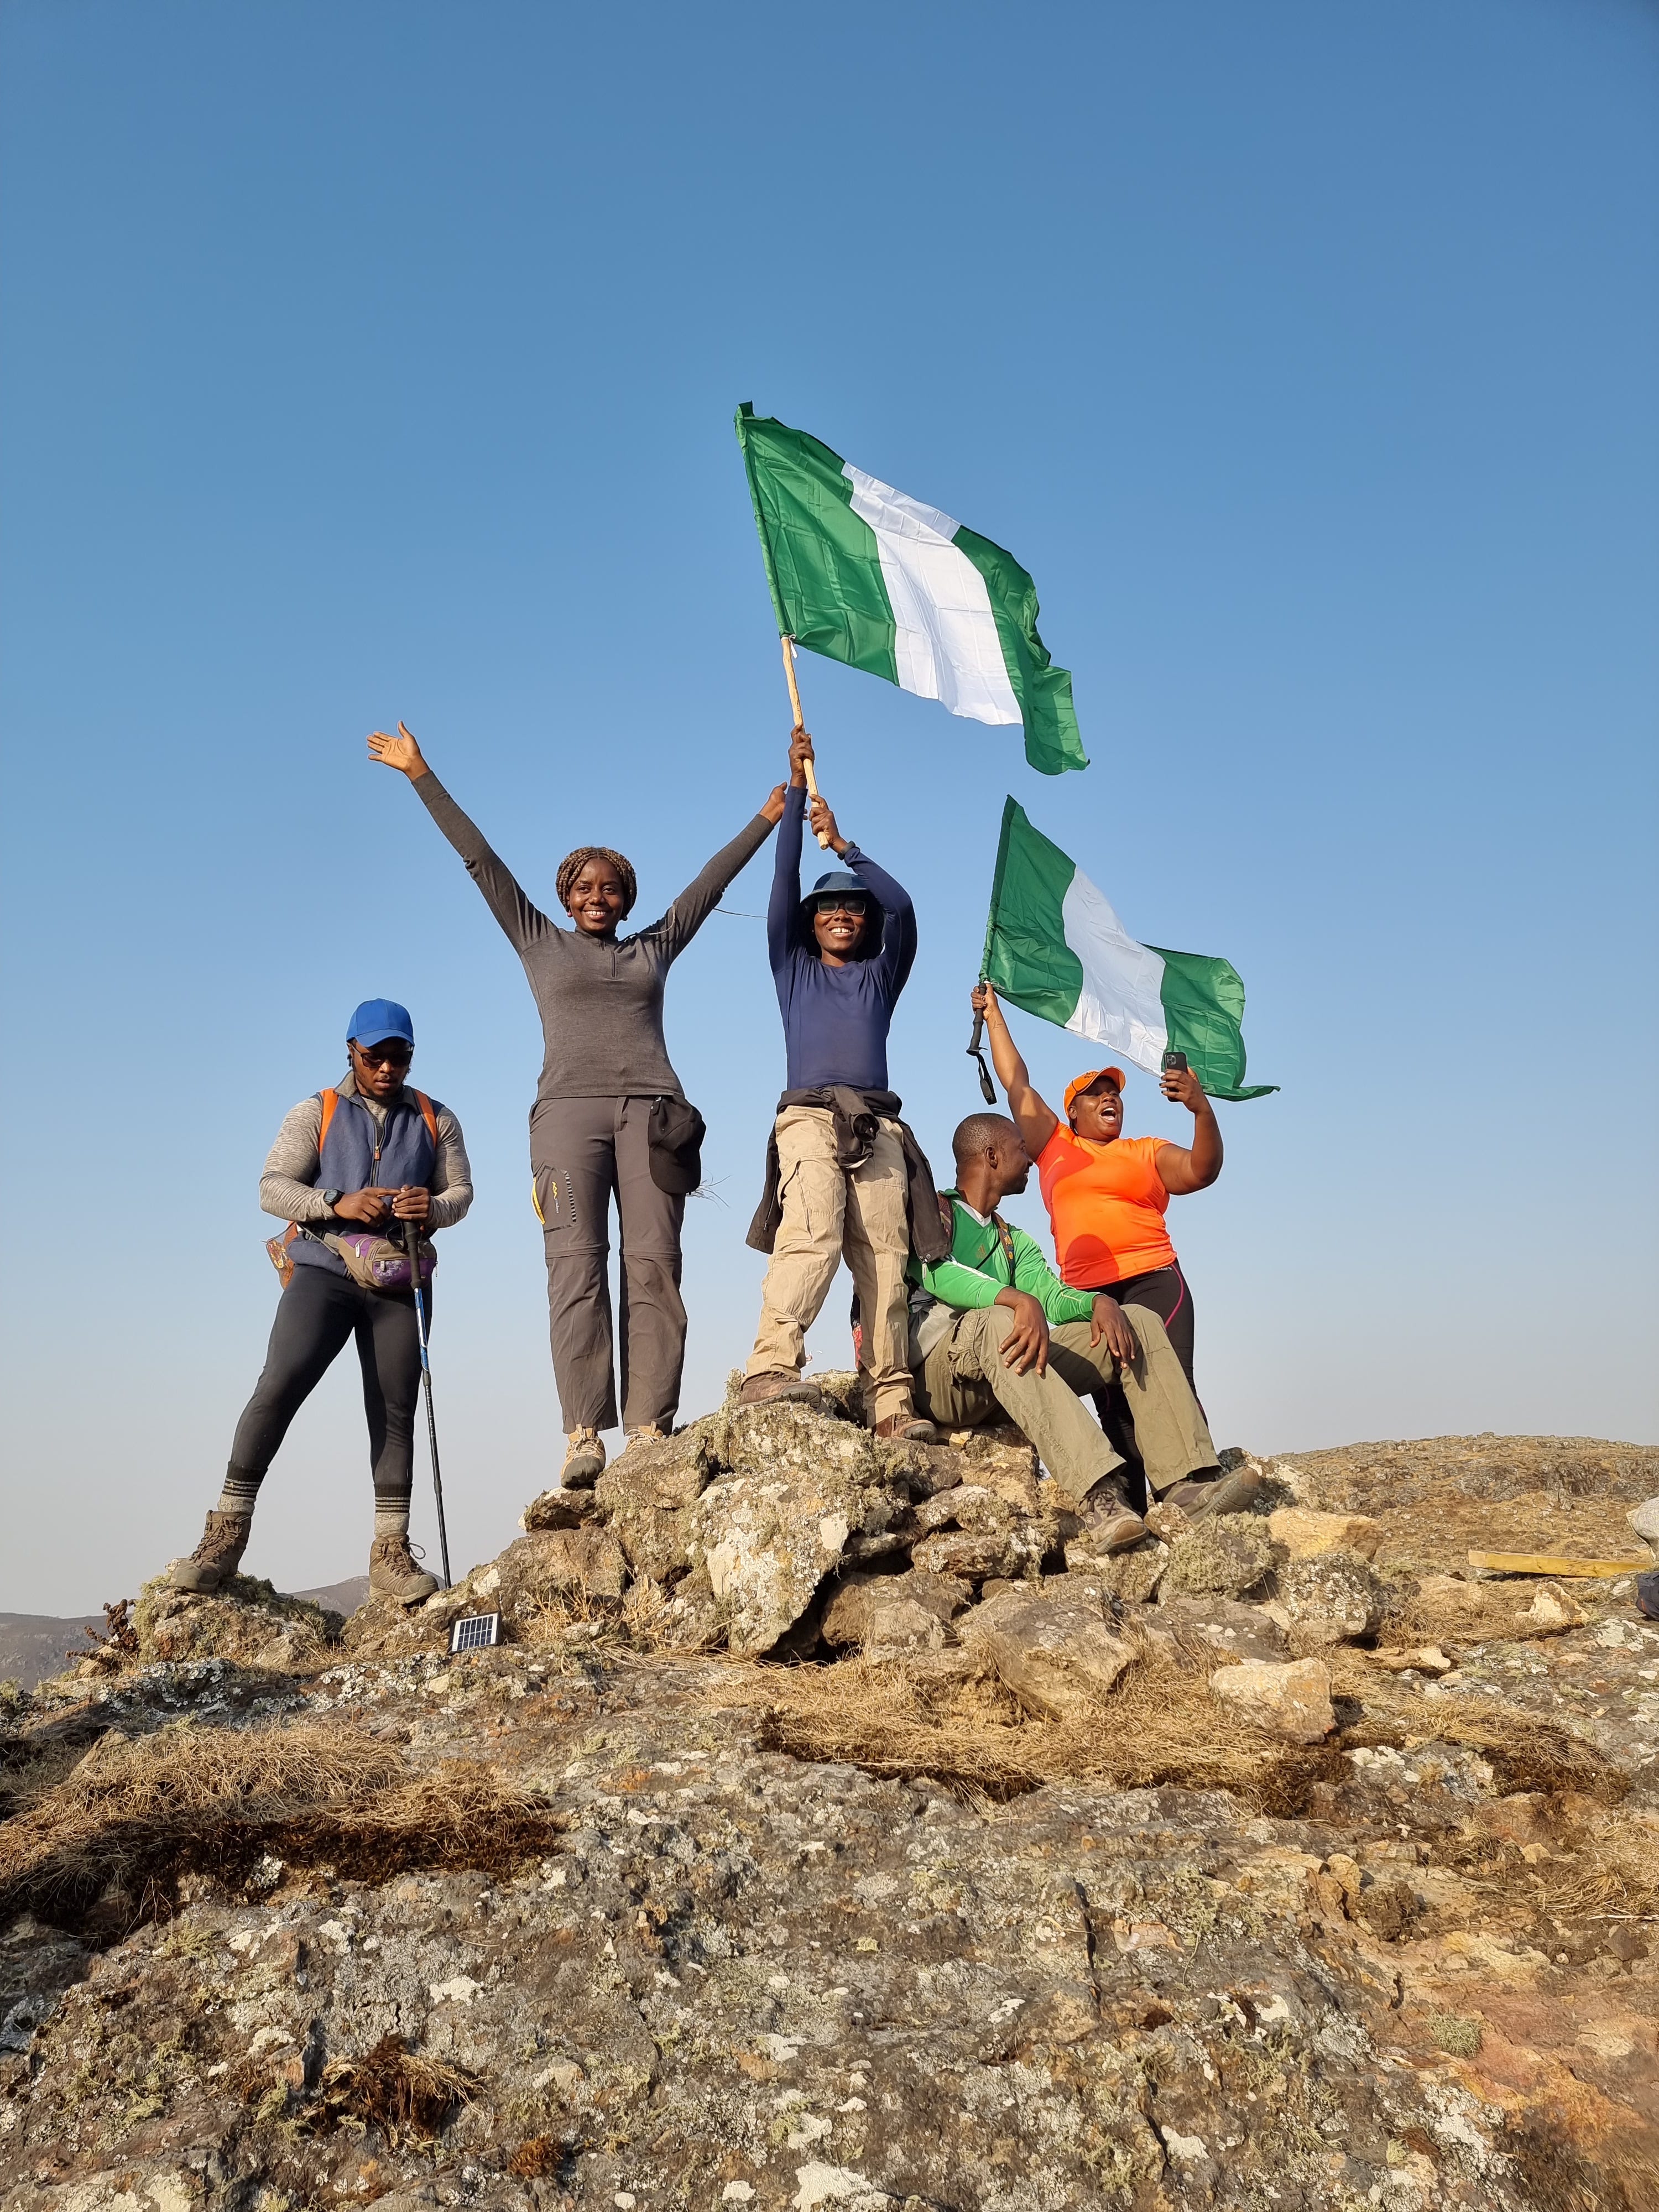 What's the highest point in Nigeria and why has no one heard of it?